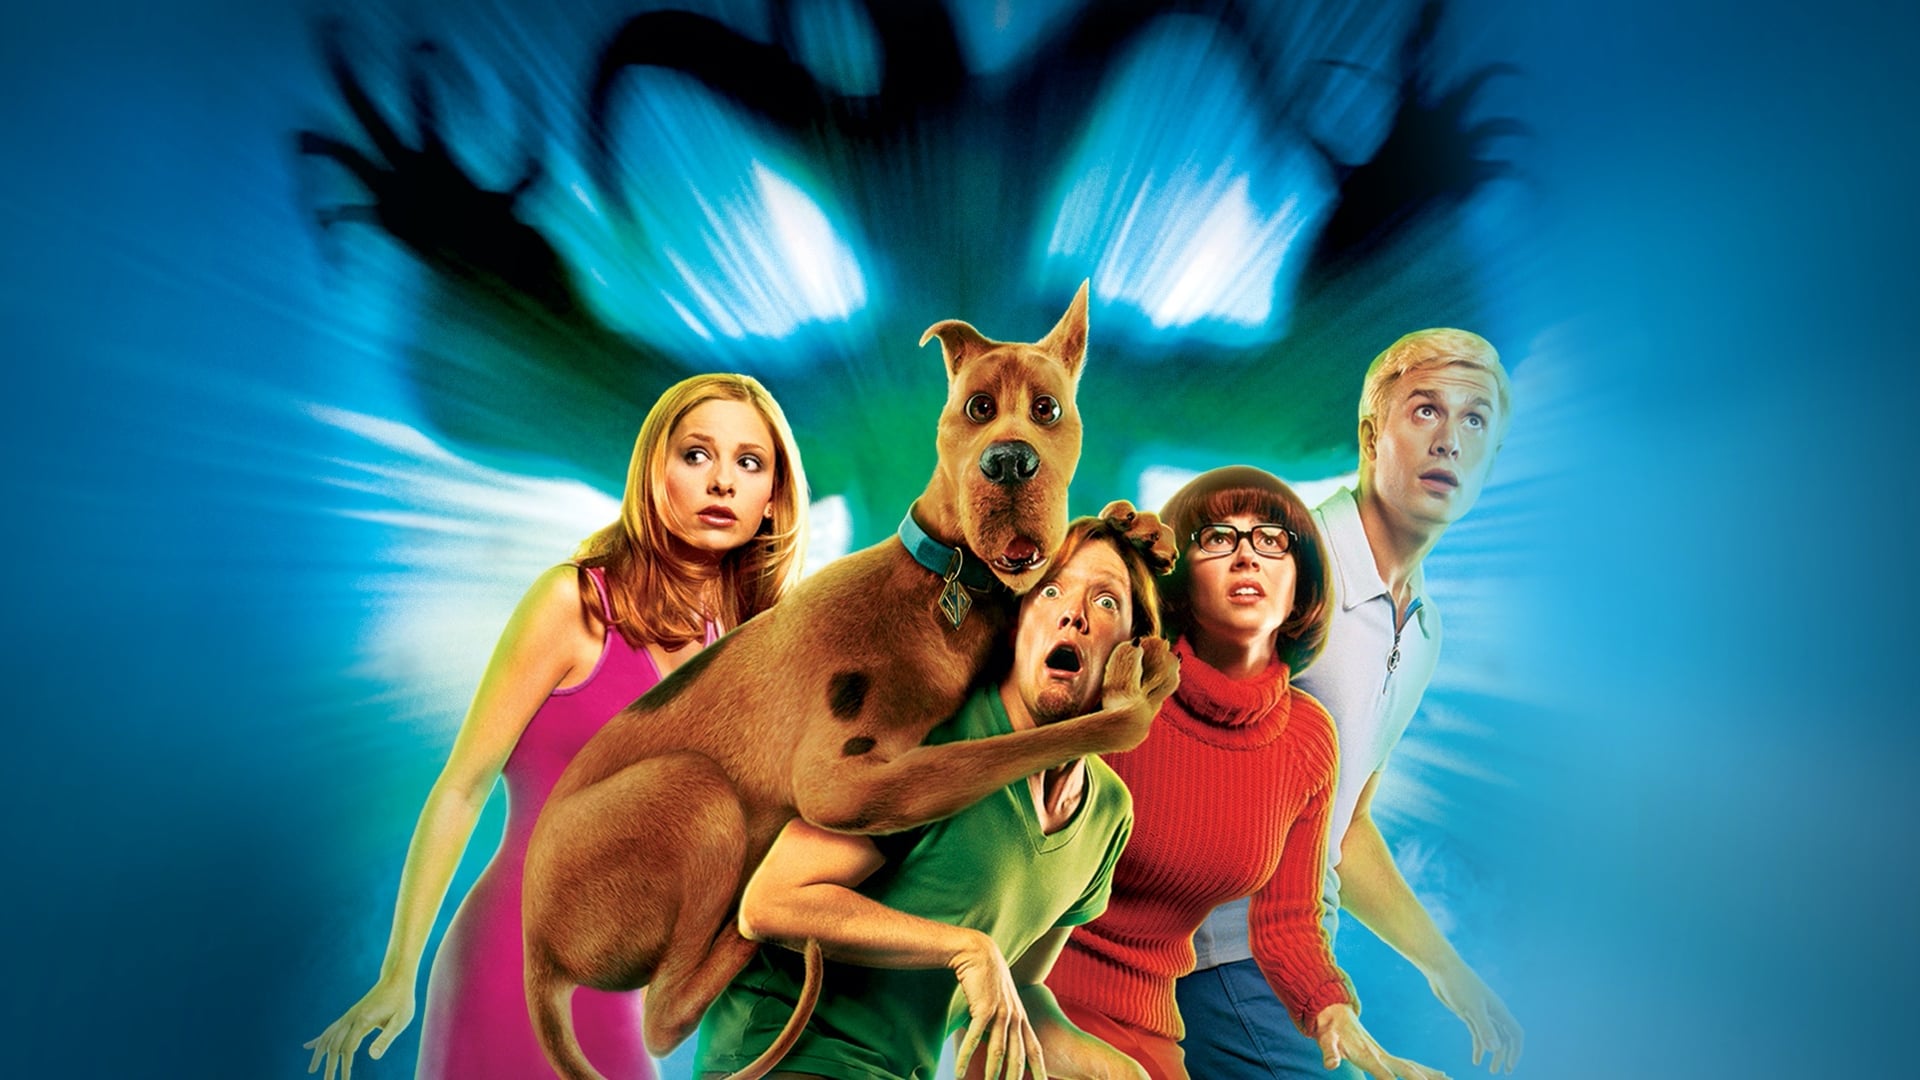 2 Games in 1 Double Pack: Scooby-Doo / Scooby-Doo 2: Monsters Unleashed